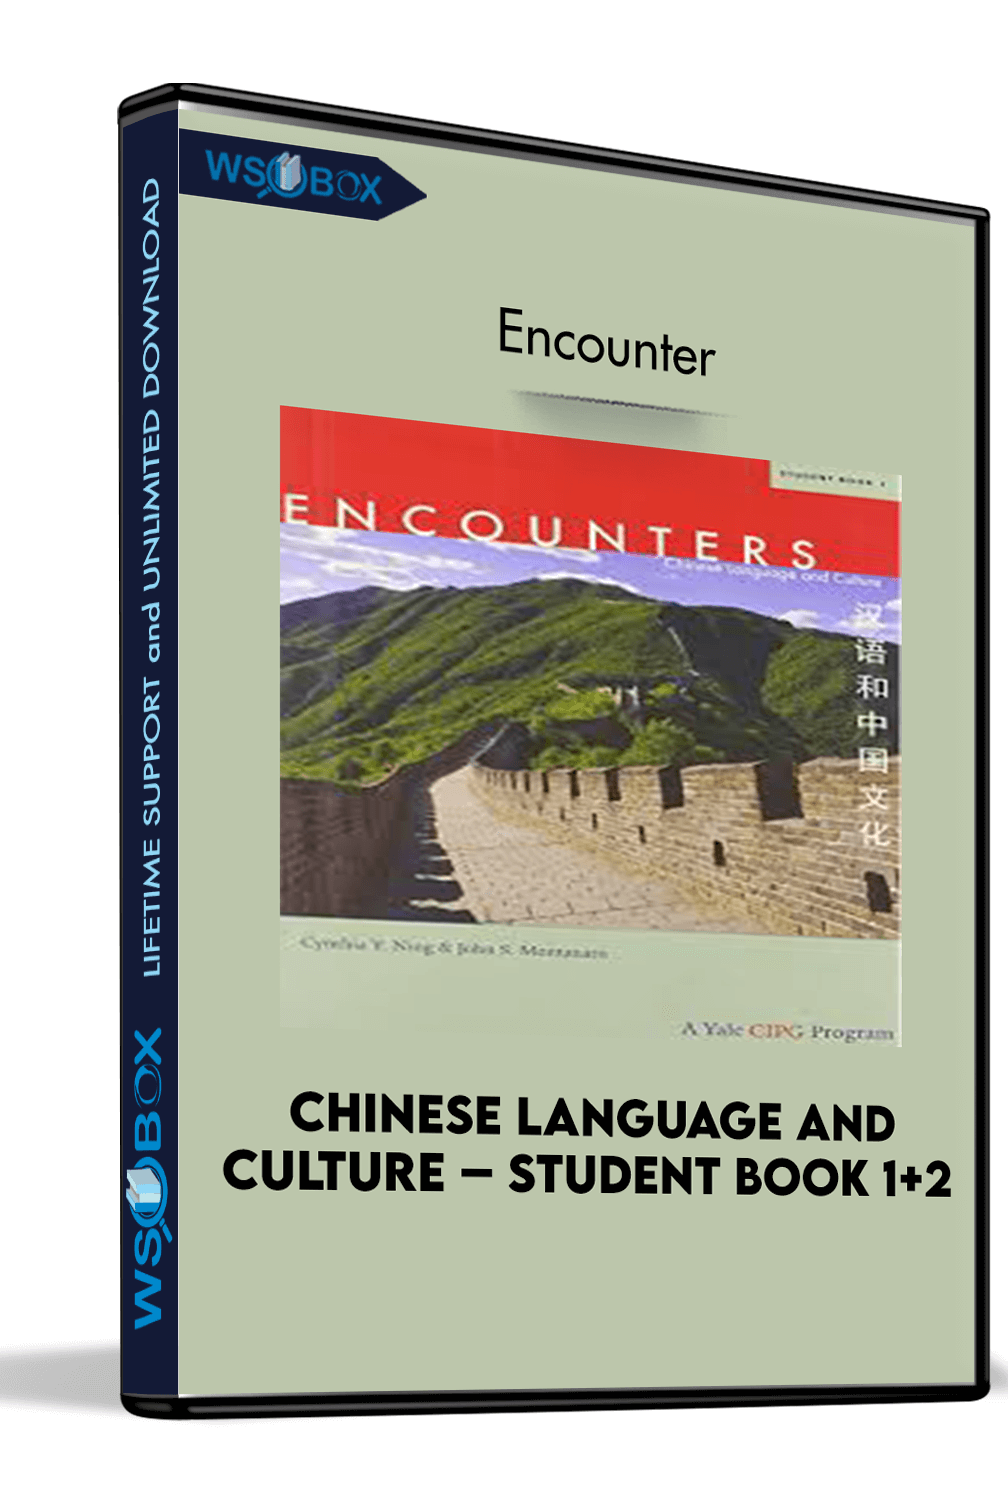 Chinese Language and Culture – Student Book 1+2 – Encounter